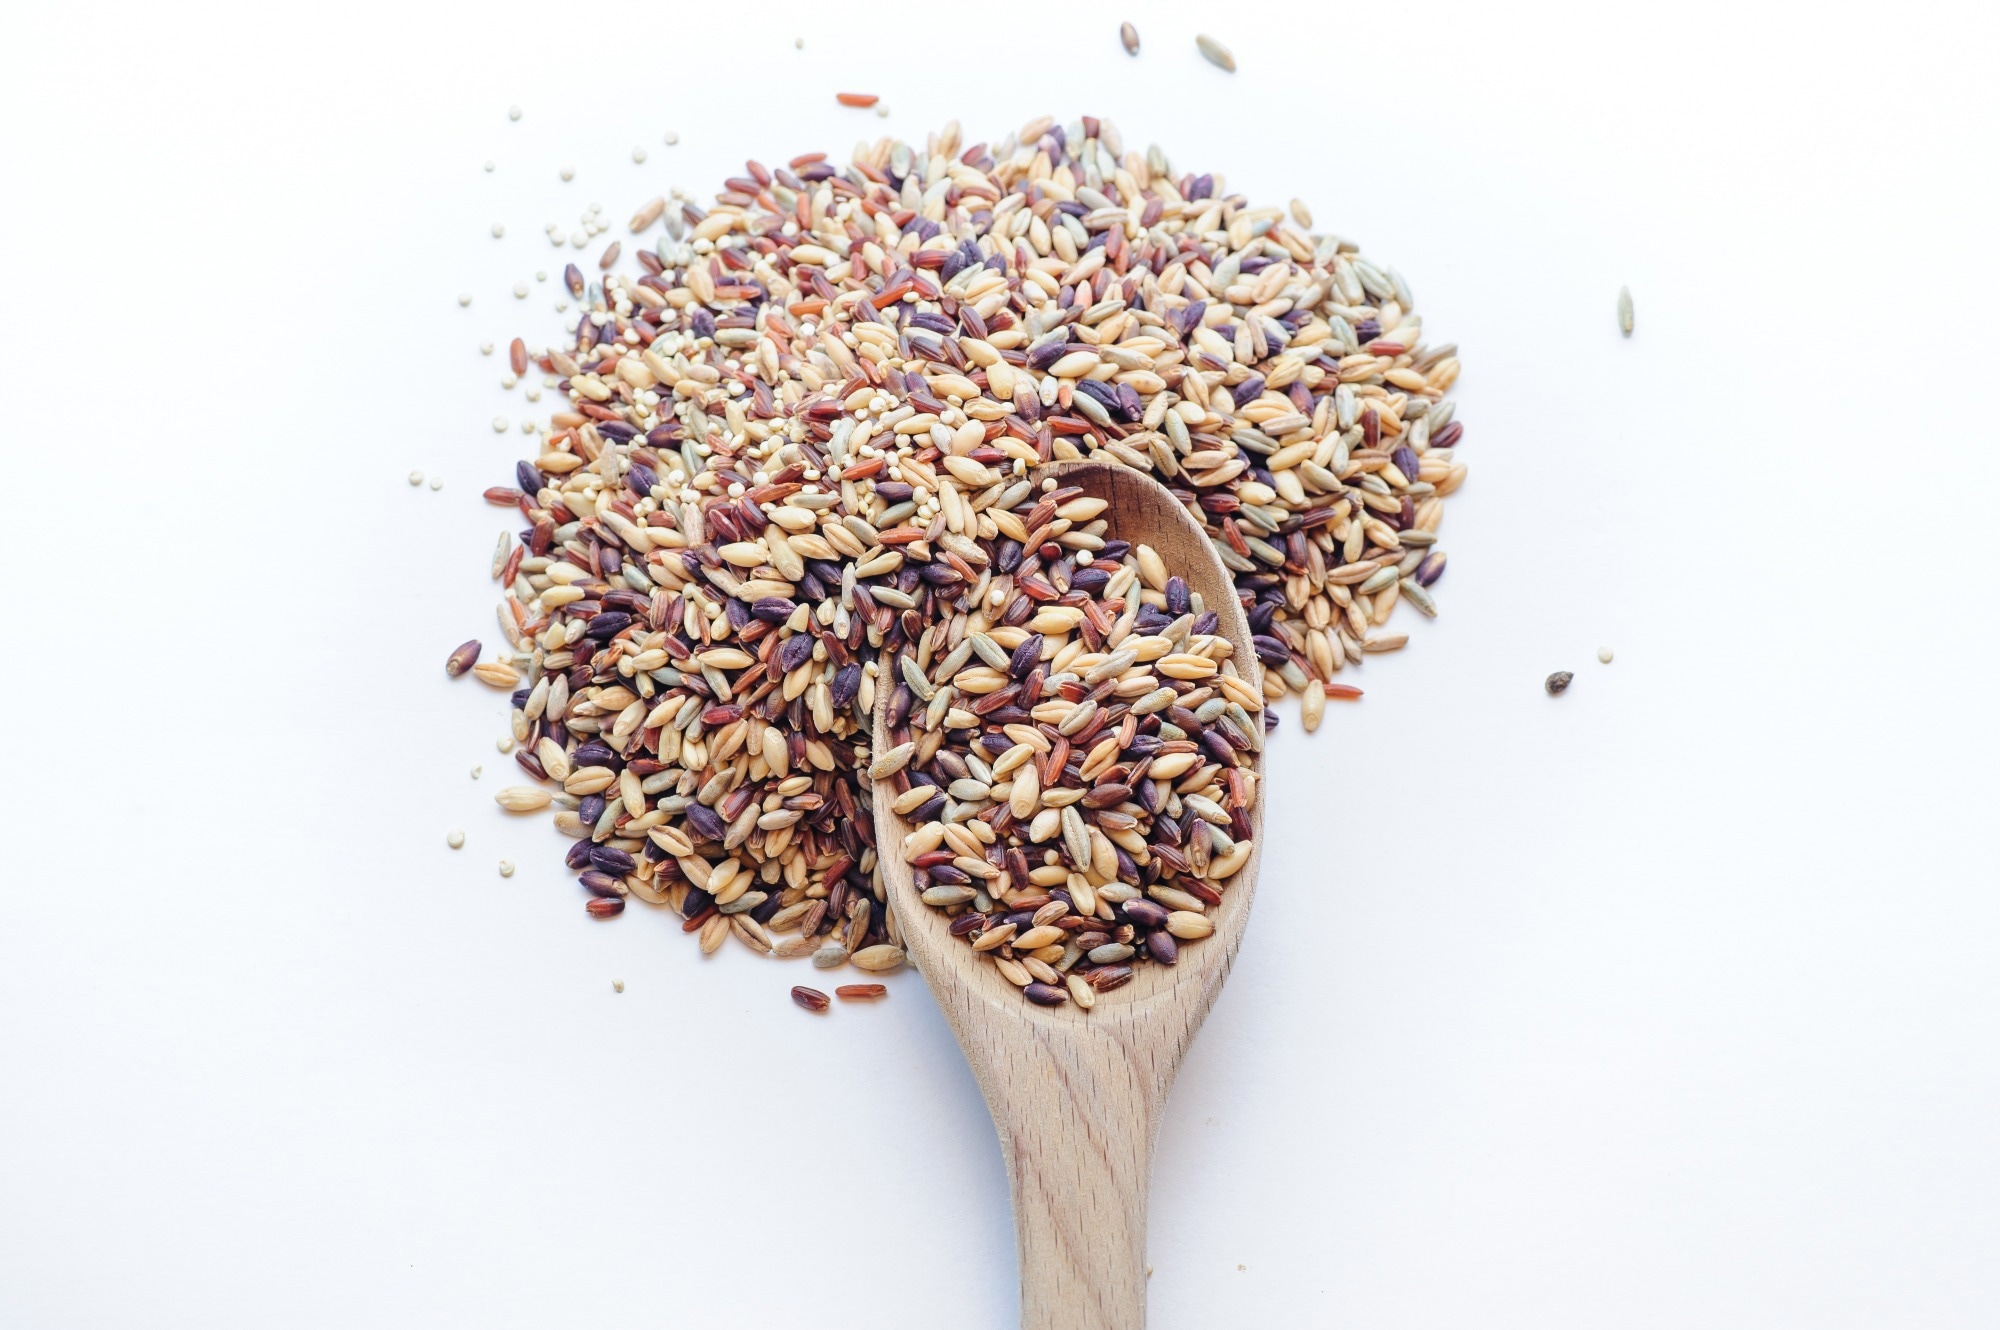 Study: Use of ancient grains for the management of diabetes mellitus: A systematic review and meta-analysis. Image Credit: windcoast / Shutterstock